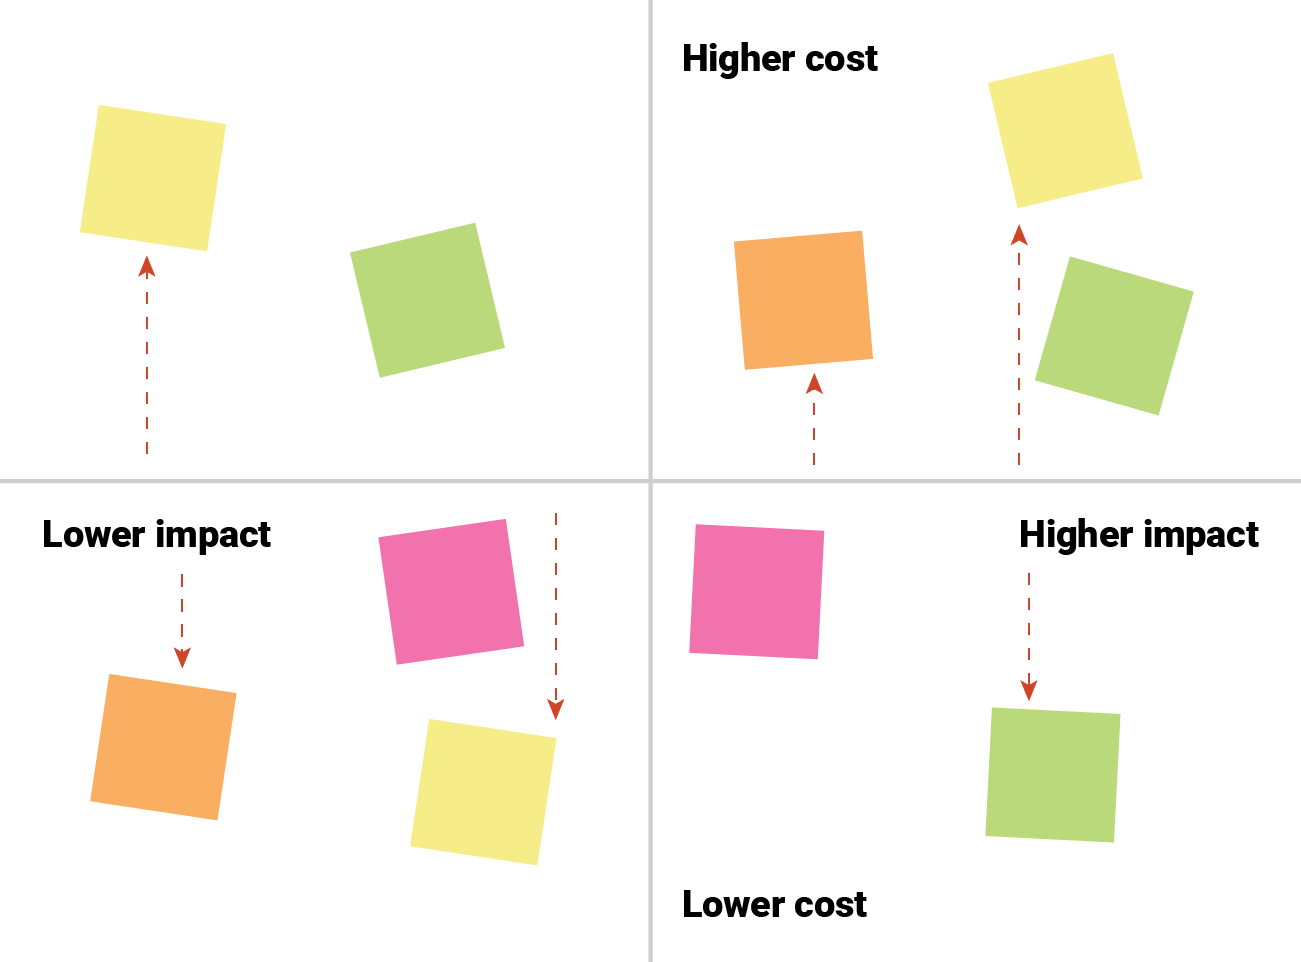 Image of Force ranking ideas on the vertical criteria, while maintaining horizontal placement